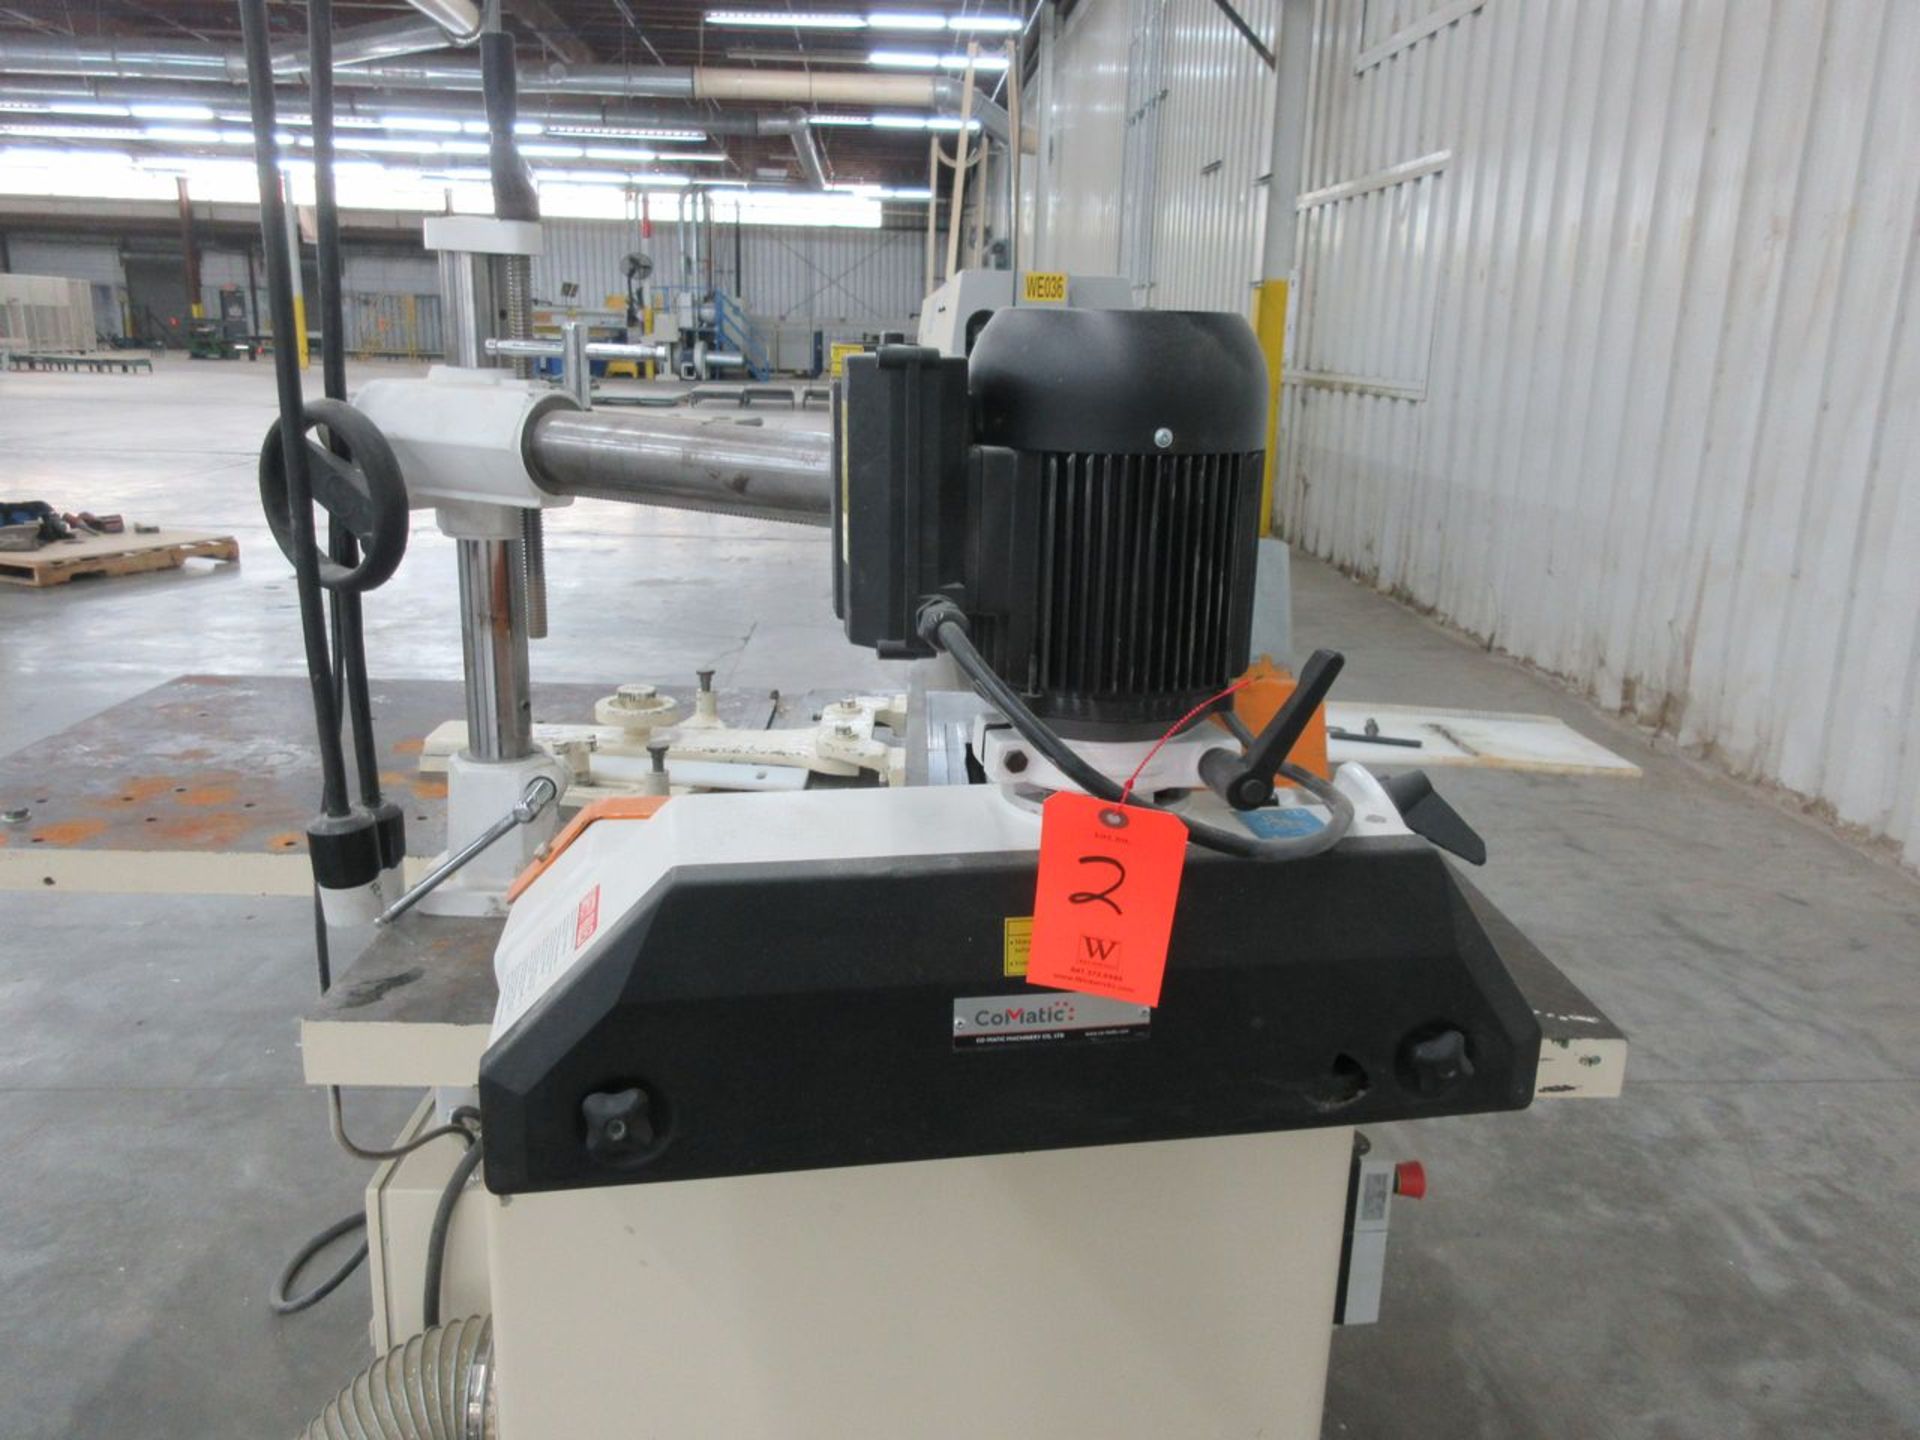 Co-MaTic 4-Roll Model AF48 Machine Feed (2018); (Mounted on Lot #: 1)